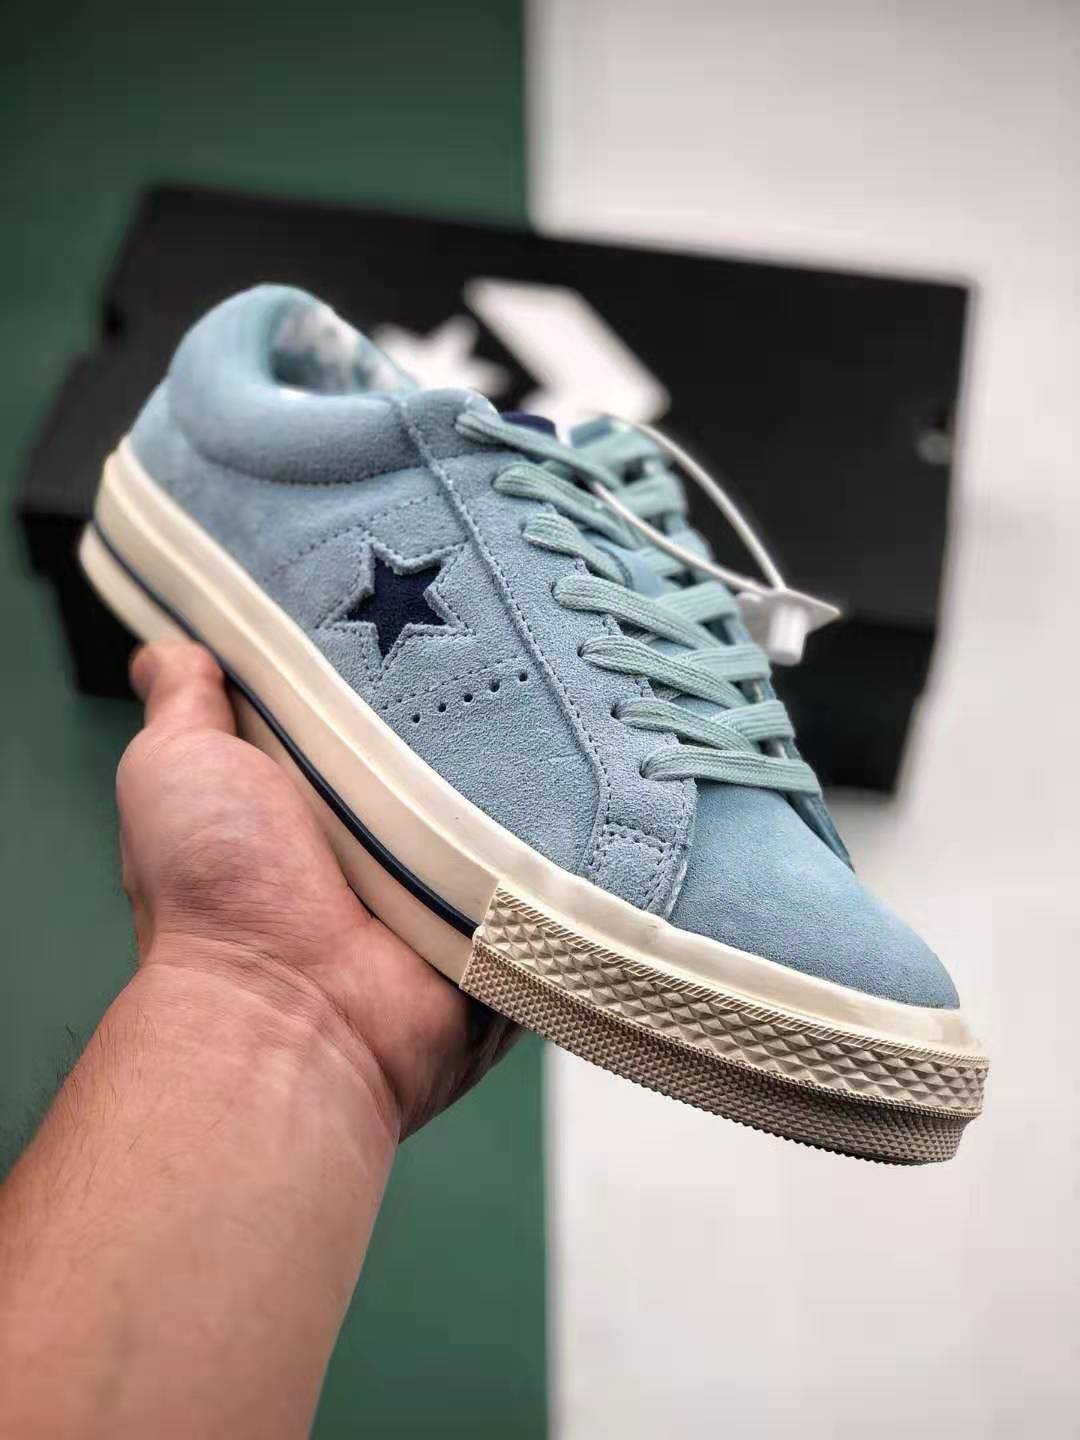 Converse One Star Suede 'Tropical Feet' - Stylish and Vibrant Sneakers